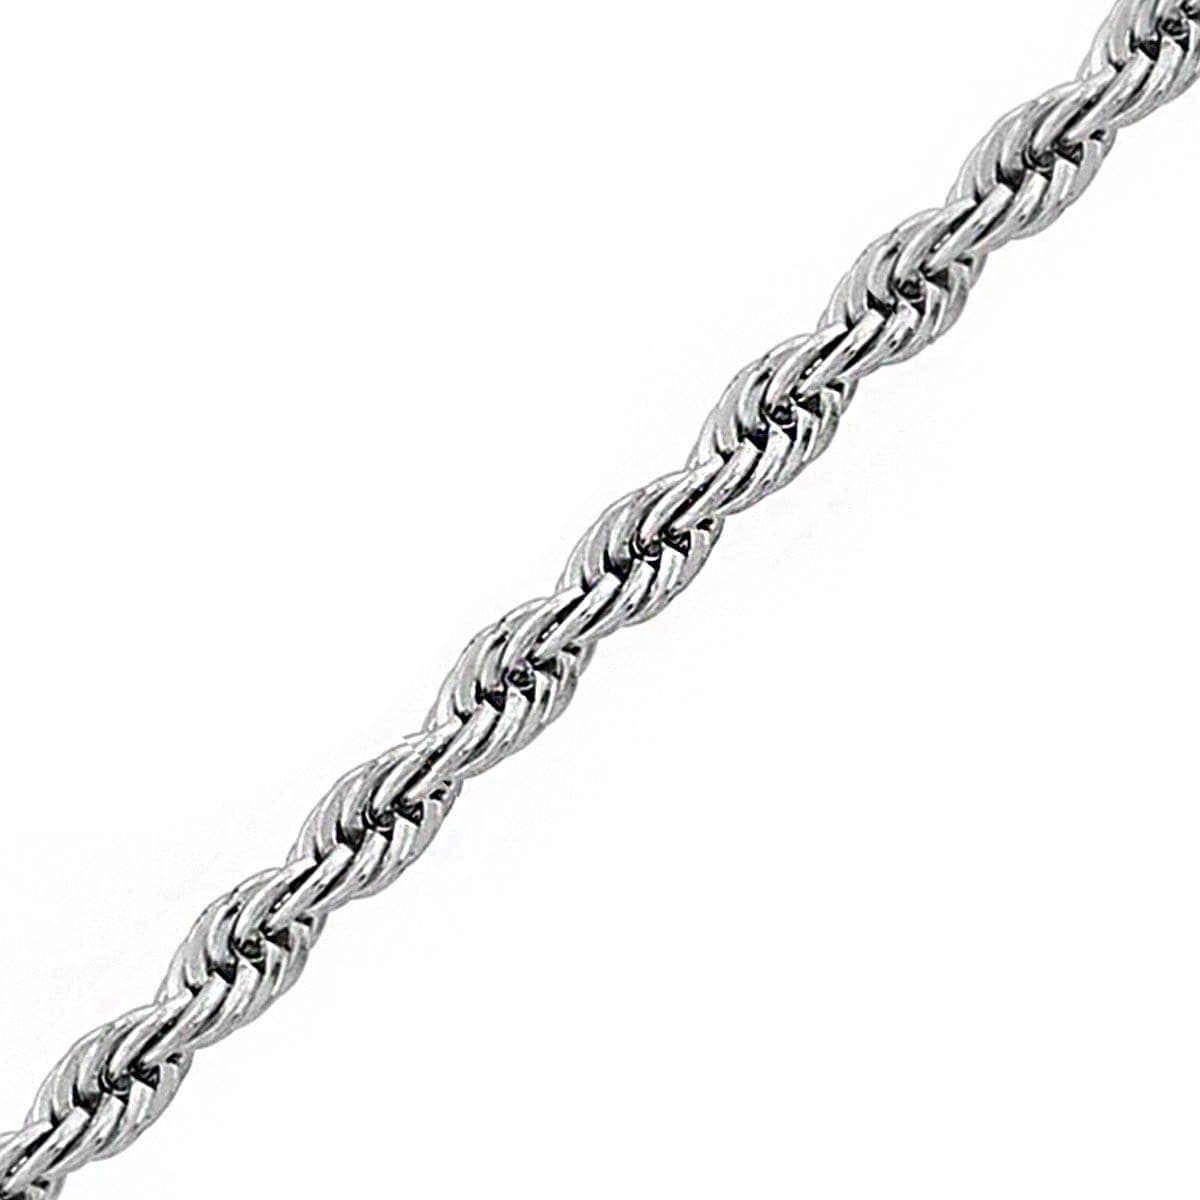 INOX JEWELRY Chains Silver Tone Stainless Steel Polished 3.5mm French Rope Chain